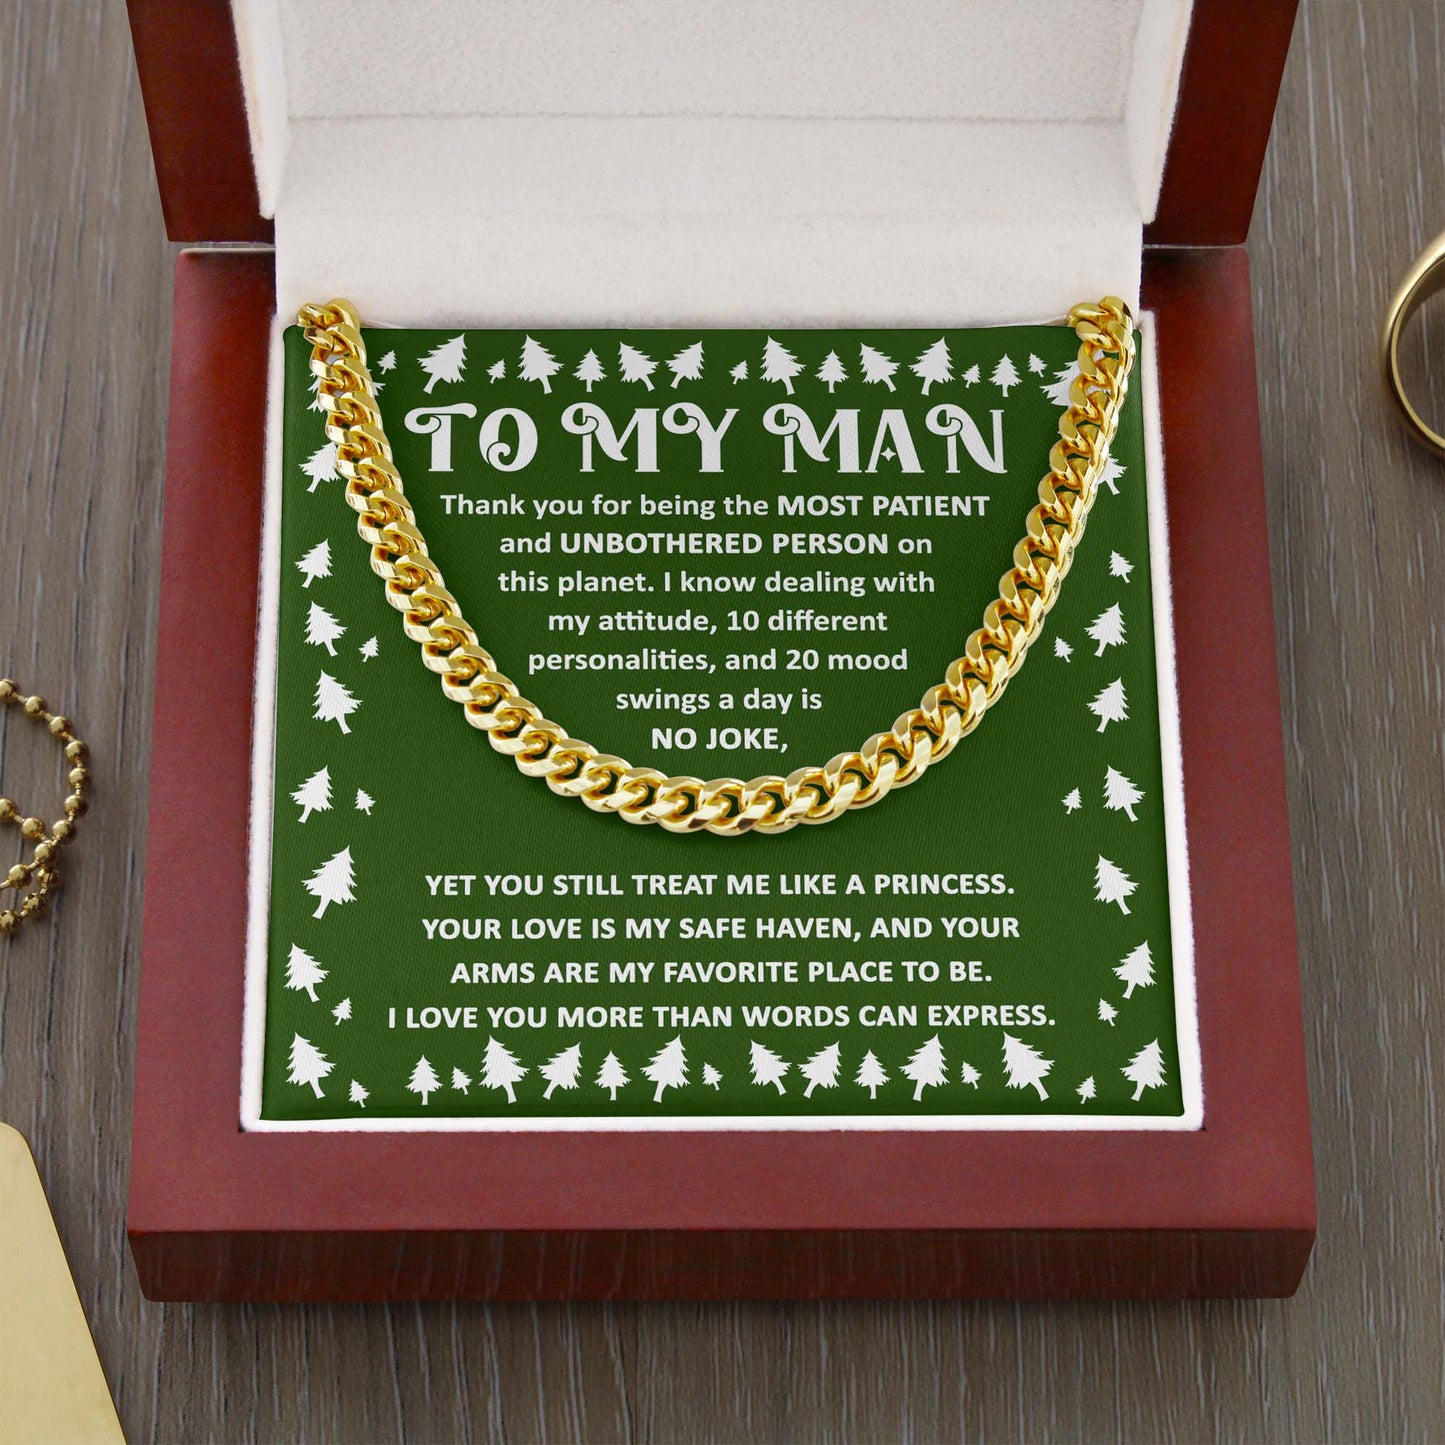 To My Man Love You More Than Words Can Express Cuban Link Chain, Gift For Him - keepsaken